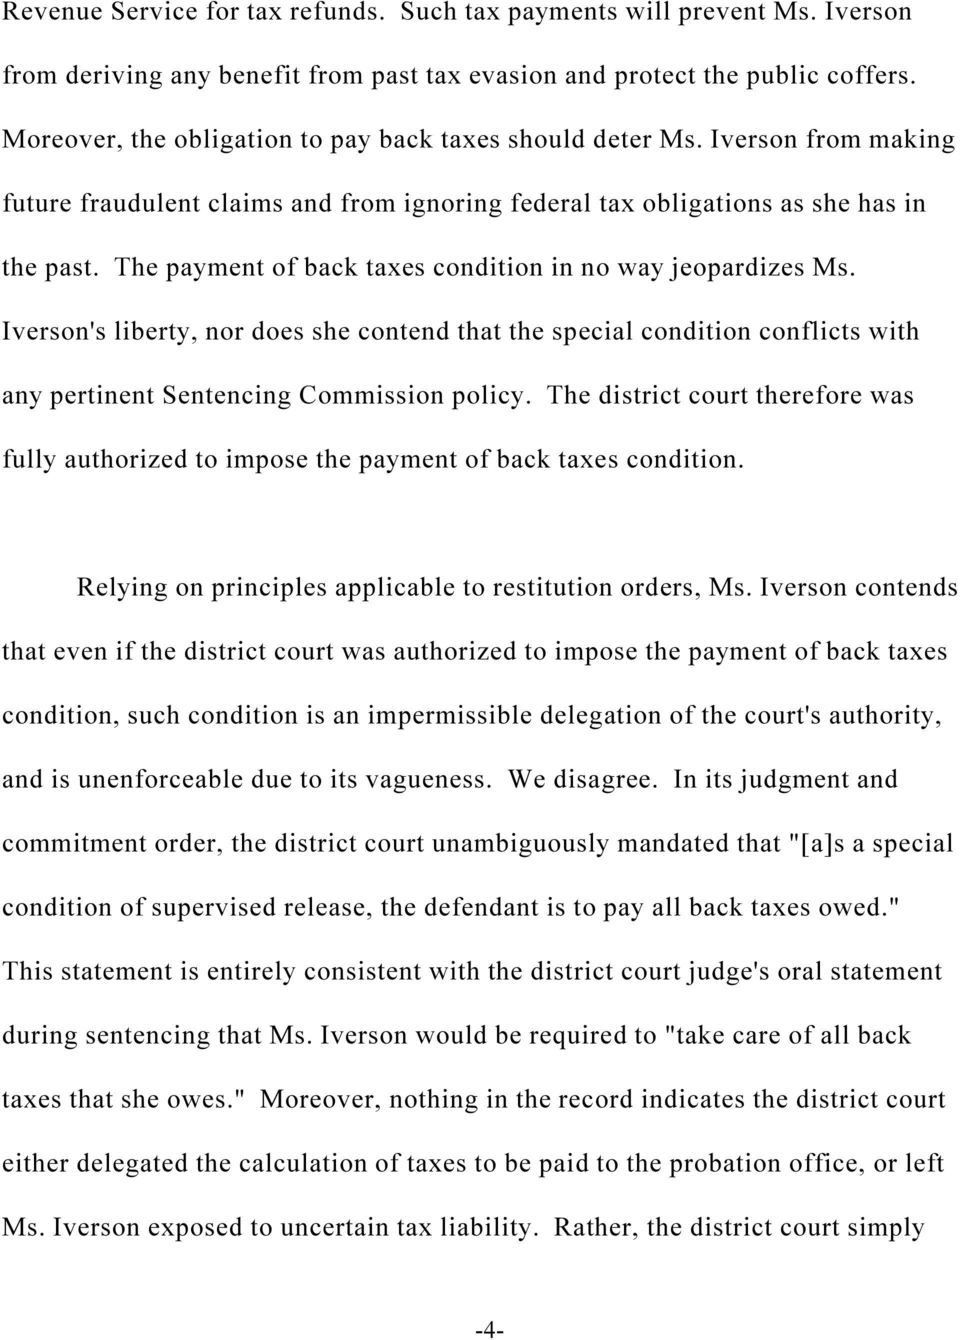 The payment of back taxes condition in no way jeopardizes Ms. Iverson's liberty, nor does she contend that the special condition conflicts with any pertinent Sentencing Commission policy.